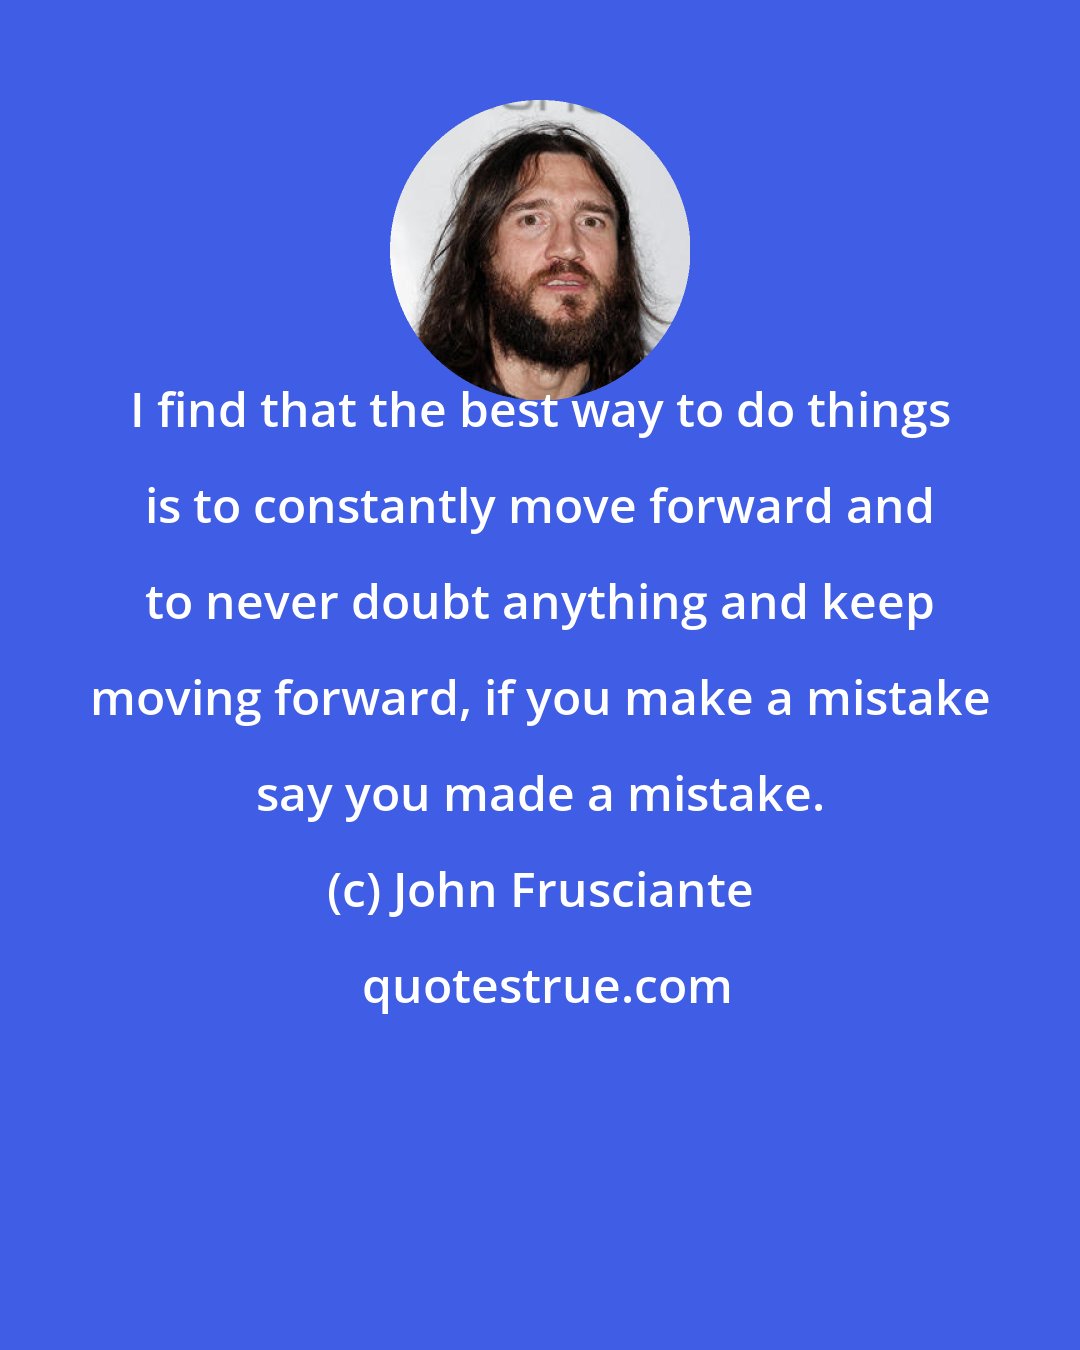 John Frusciante: I find that the best way to do things is to constantly move forward and to never doubt anything and keep moving forward, if you make a mistake say you made a mistake.